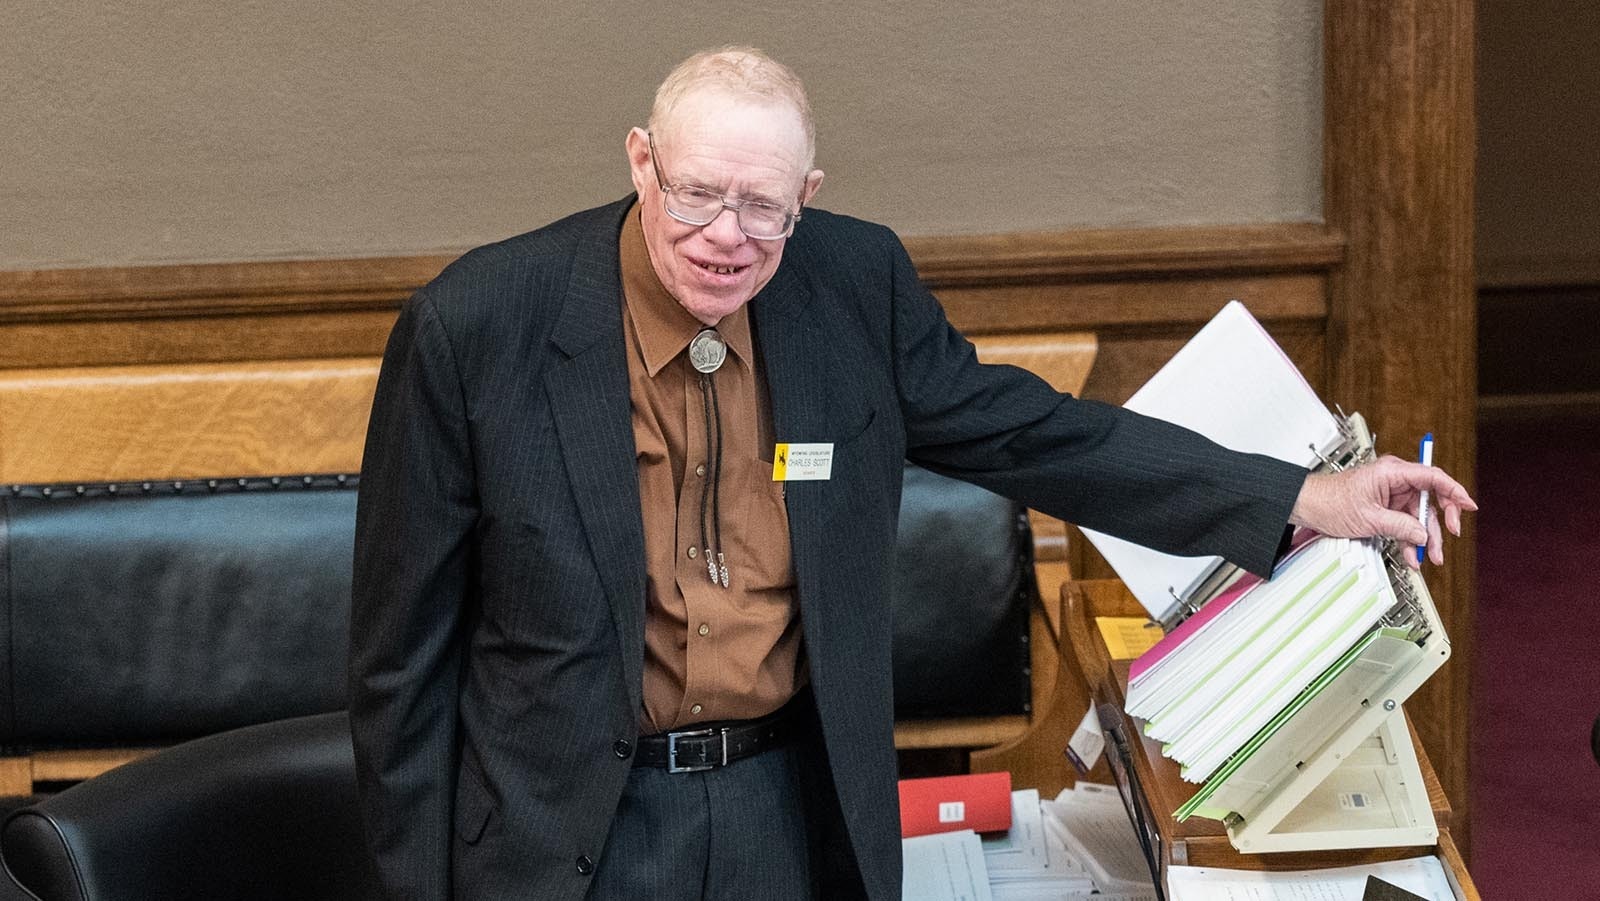 State Sen. Charlie Scott, R-Casper, was first elected to the Wyoming Legislature in 1979. He's running for reelection for a 14th term this year.